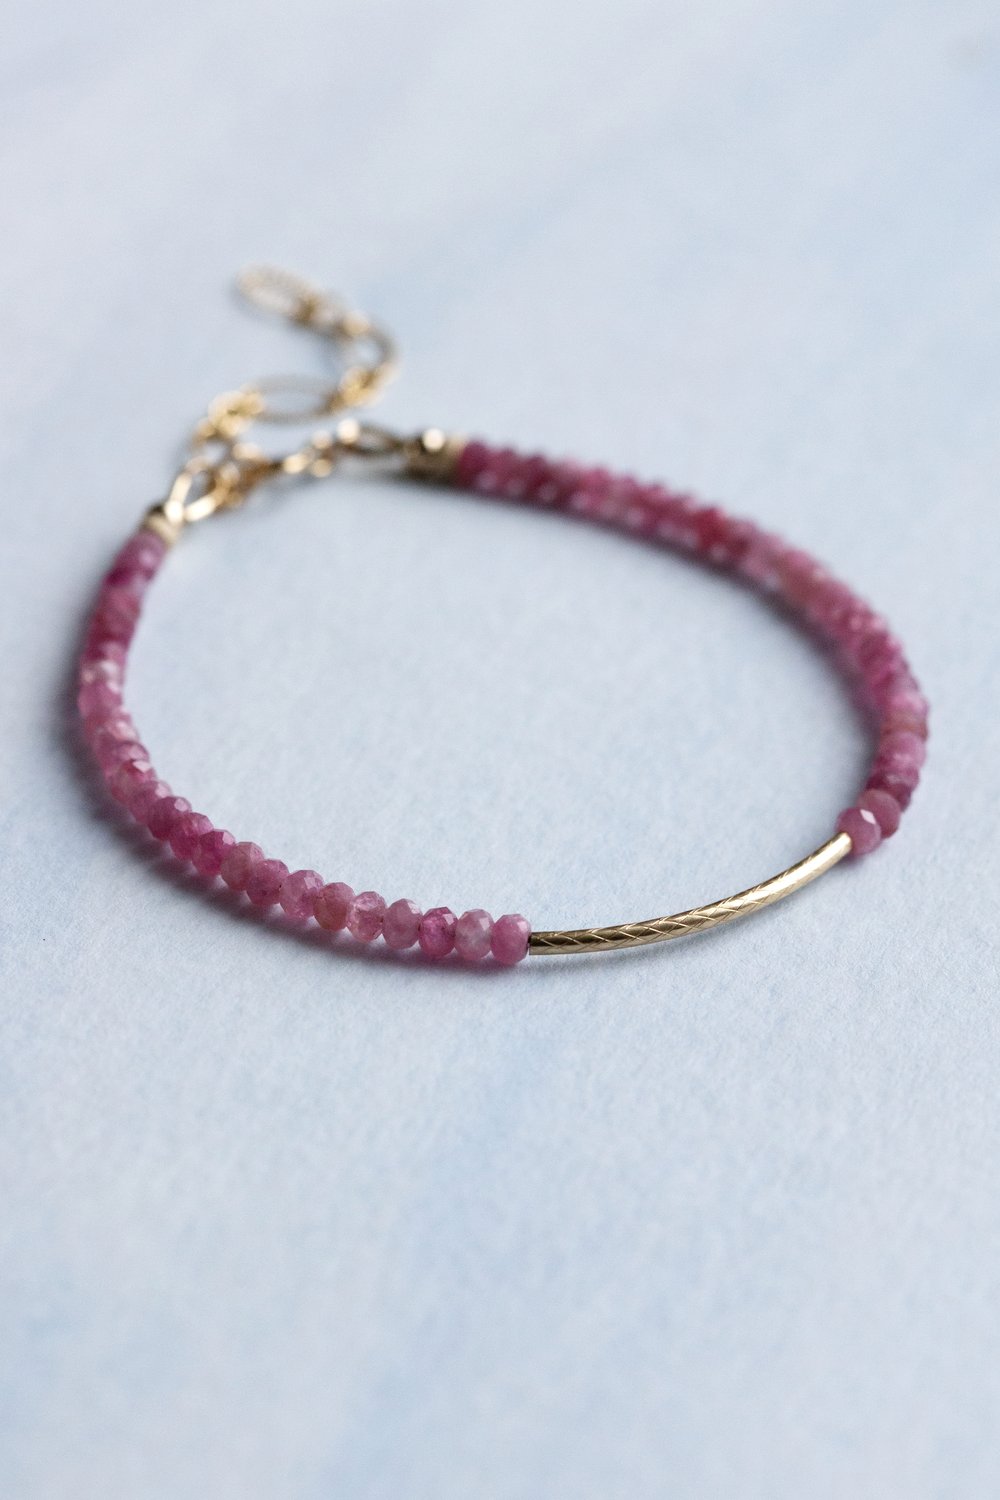 14K Gold Filled Compassion Healing Pink Tourmaline Beaded Bracelet —  Aventine Jewelry